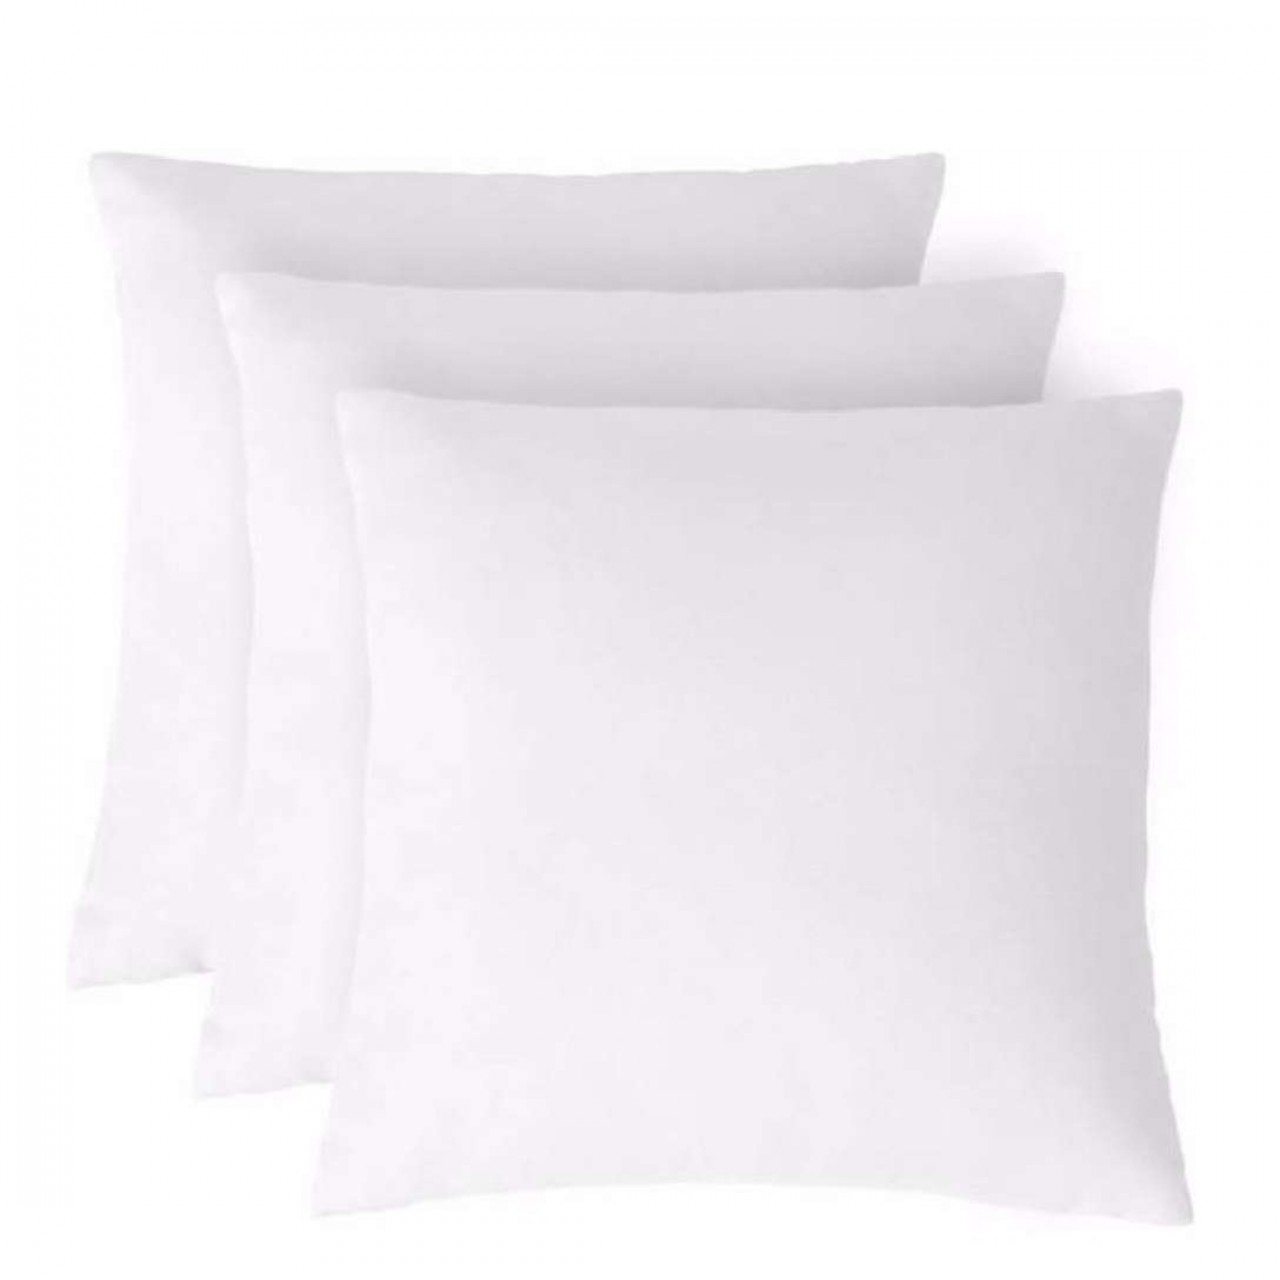 Small White High Quality Soft Cushions - Set of 4 - Polyester Fiber